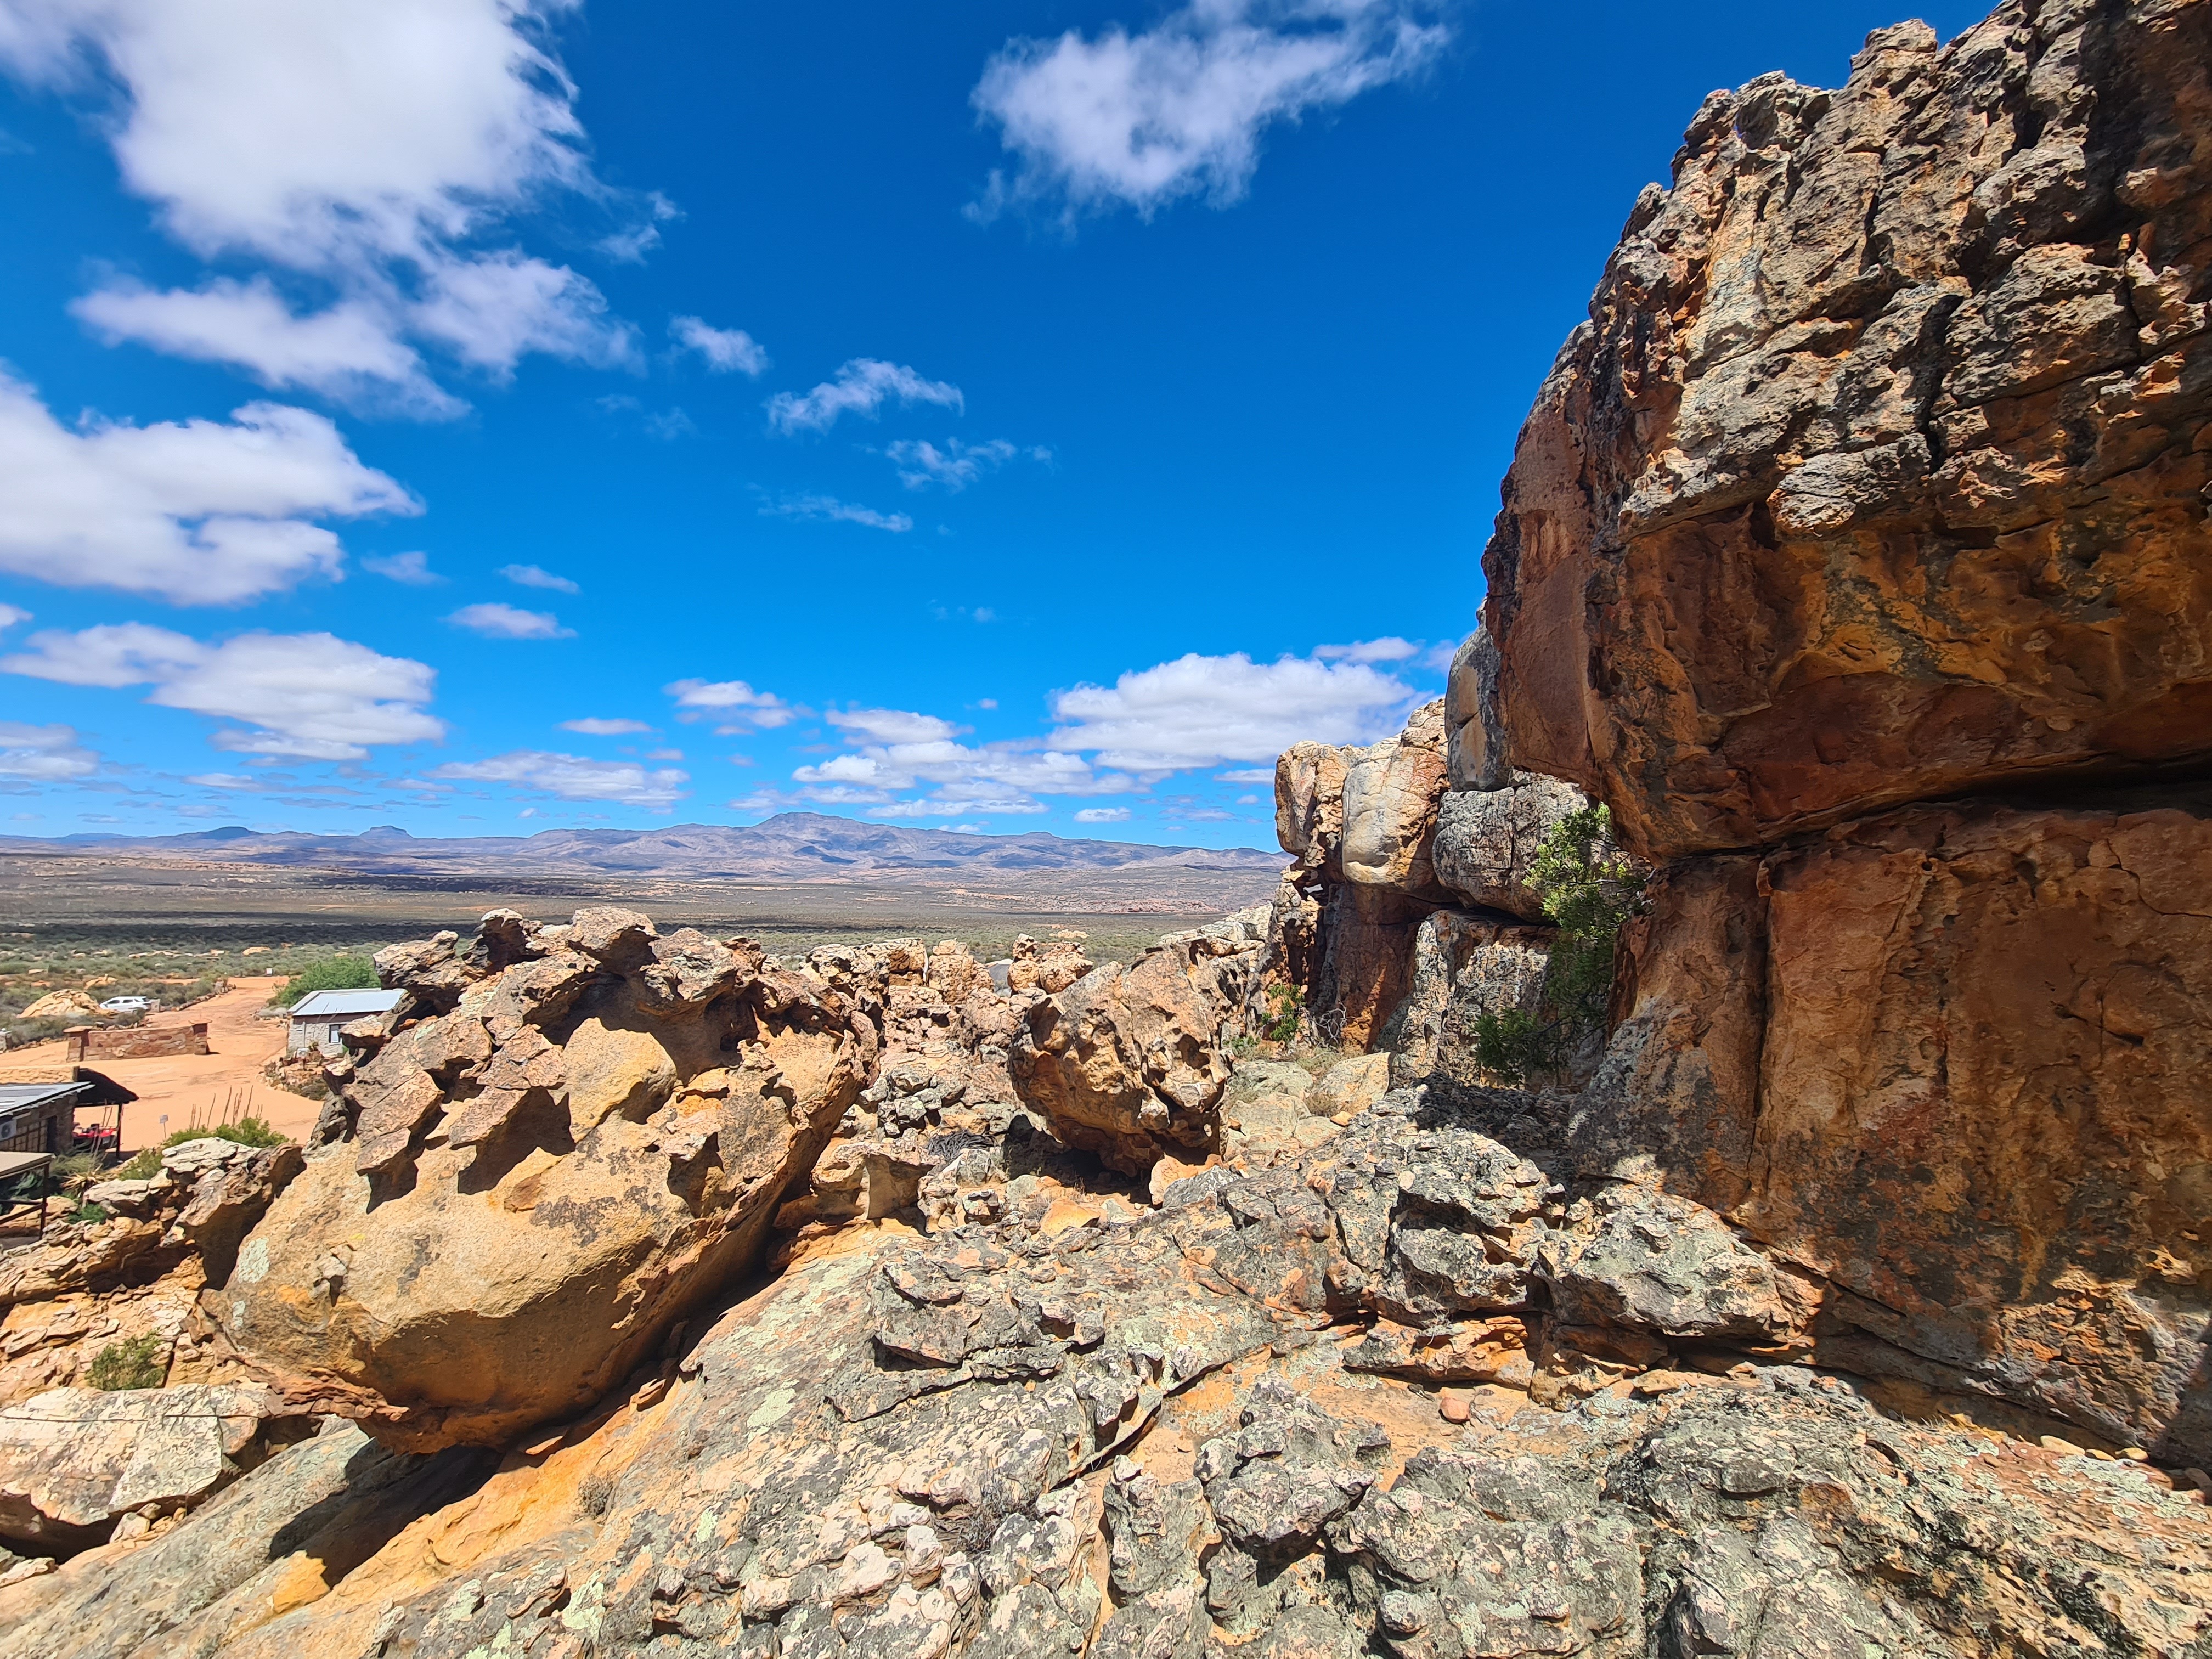 View from the outdoor spa at Kagga Kamma. Image: Carmen Clegg